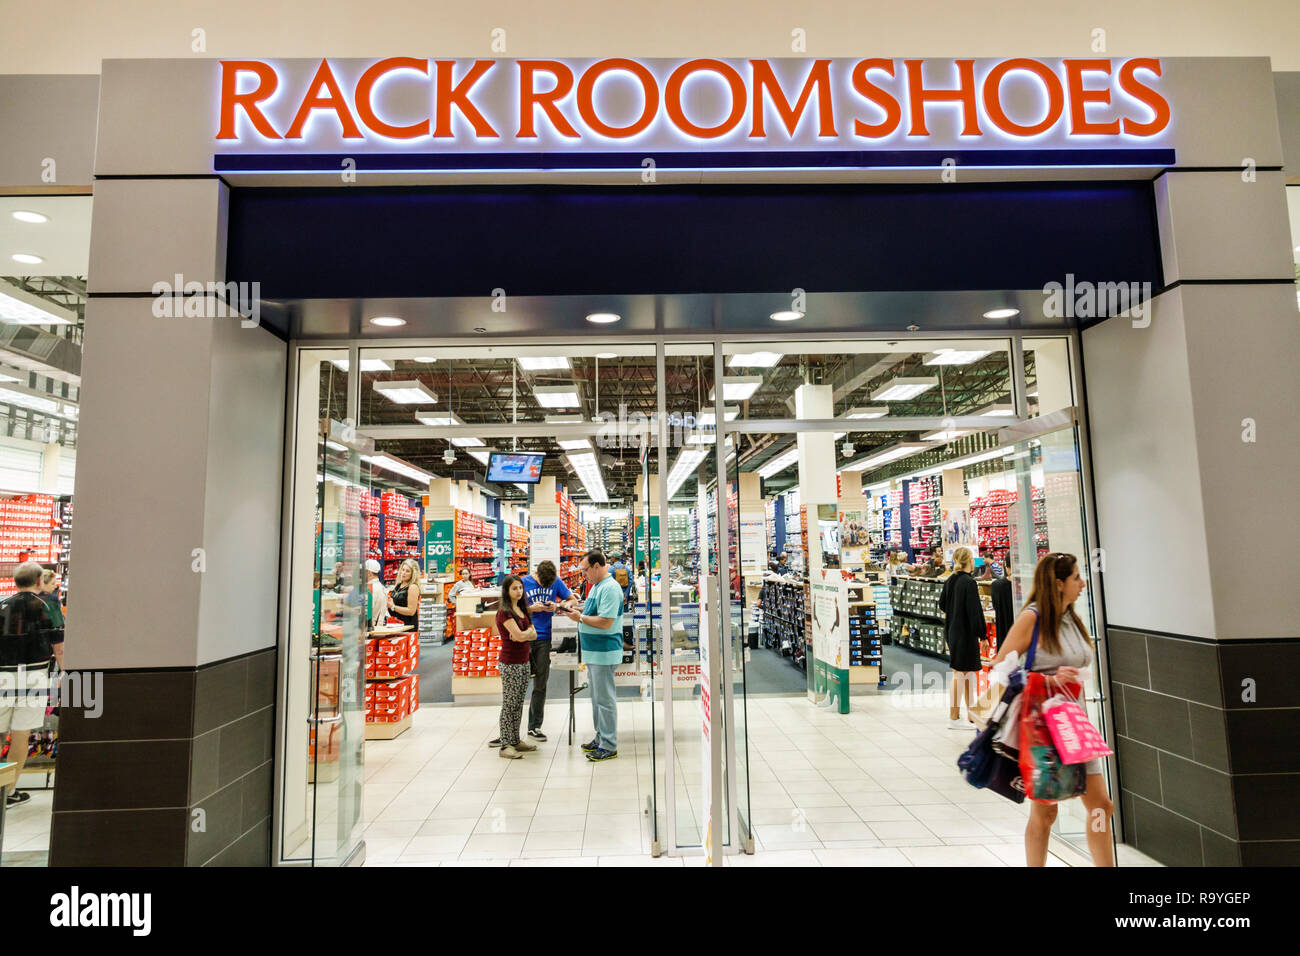 Fort Ft. Lauderdale Florida,Sunrise,Sawgrass Mills mall,Rack Room Shoes,front entrance,FL181222031 Stock Photo